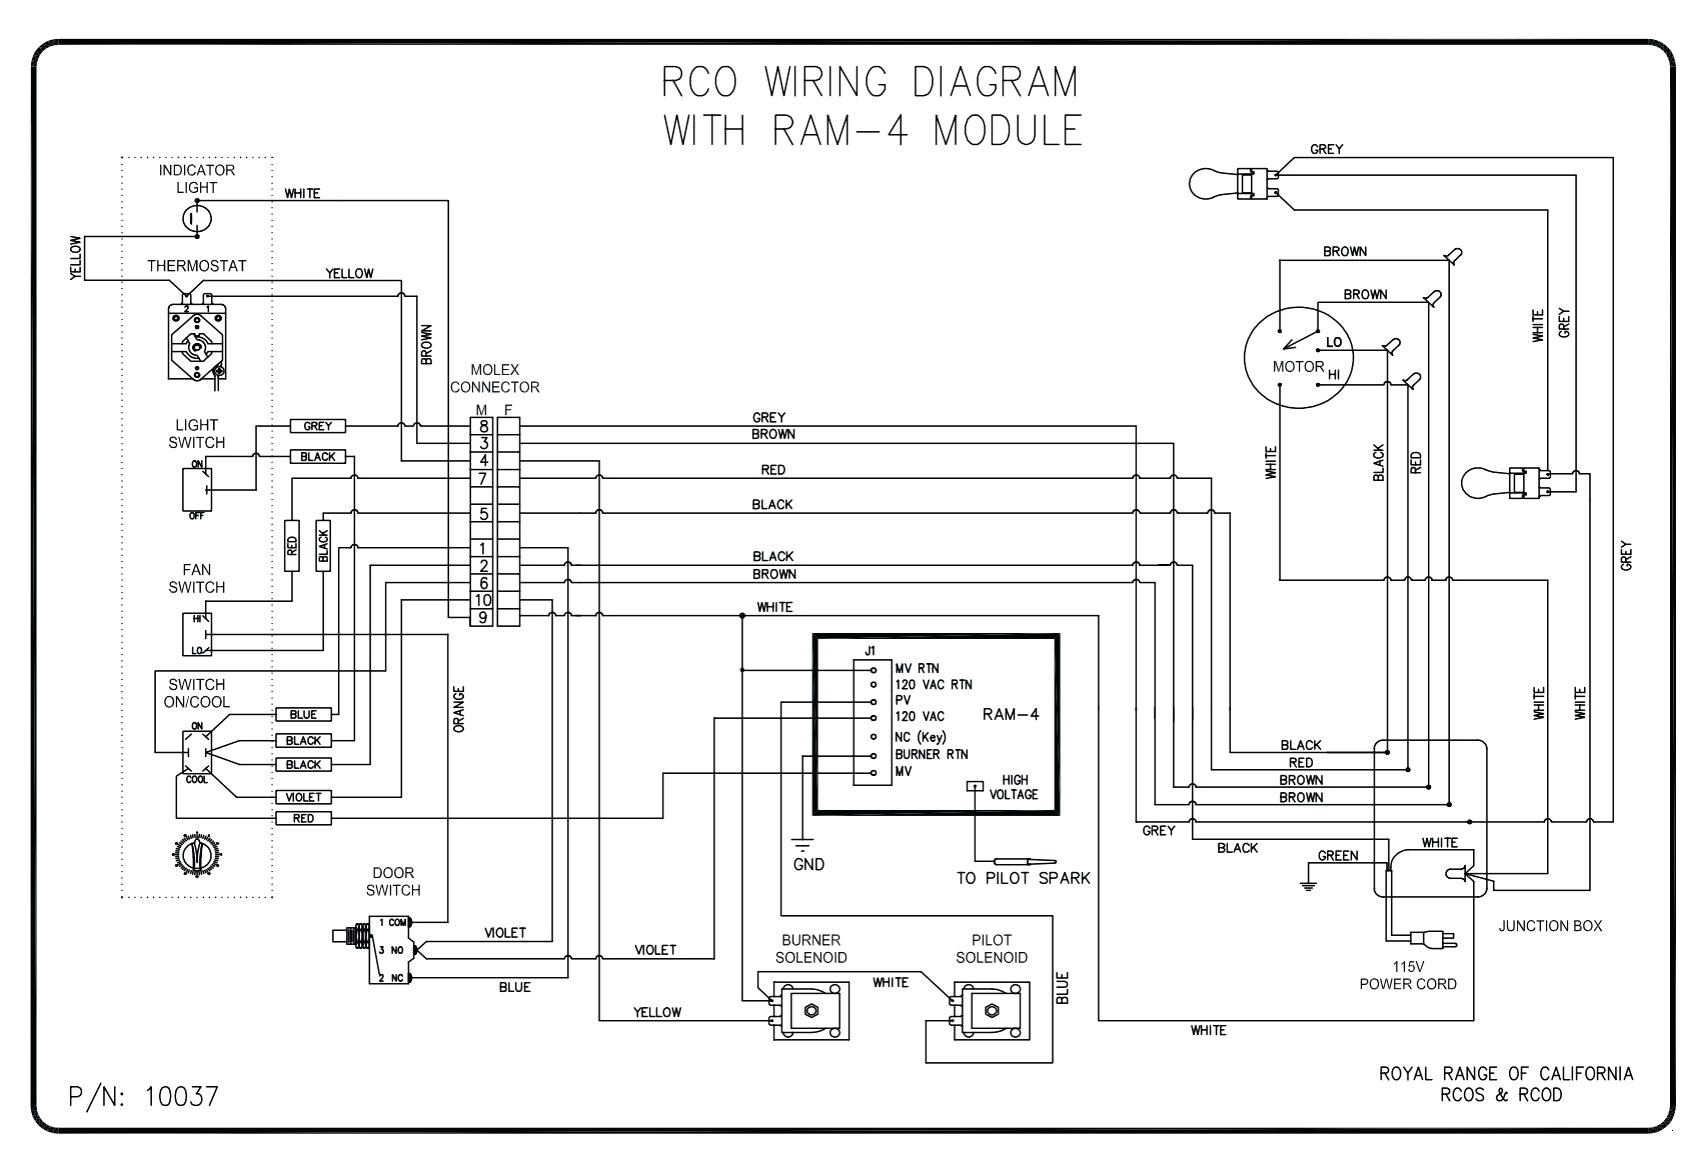 Hotpoint Electric Stove Wiring Diagram Solutions Inside - Wellread - Electric Stove Wiring Diagram